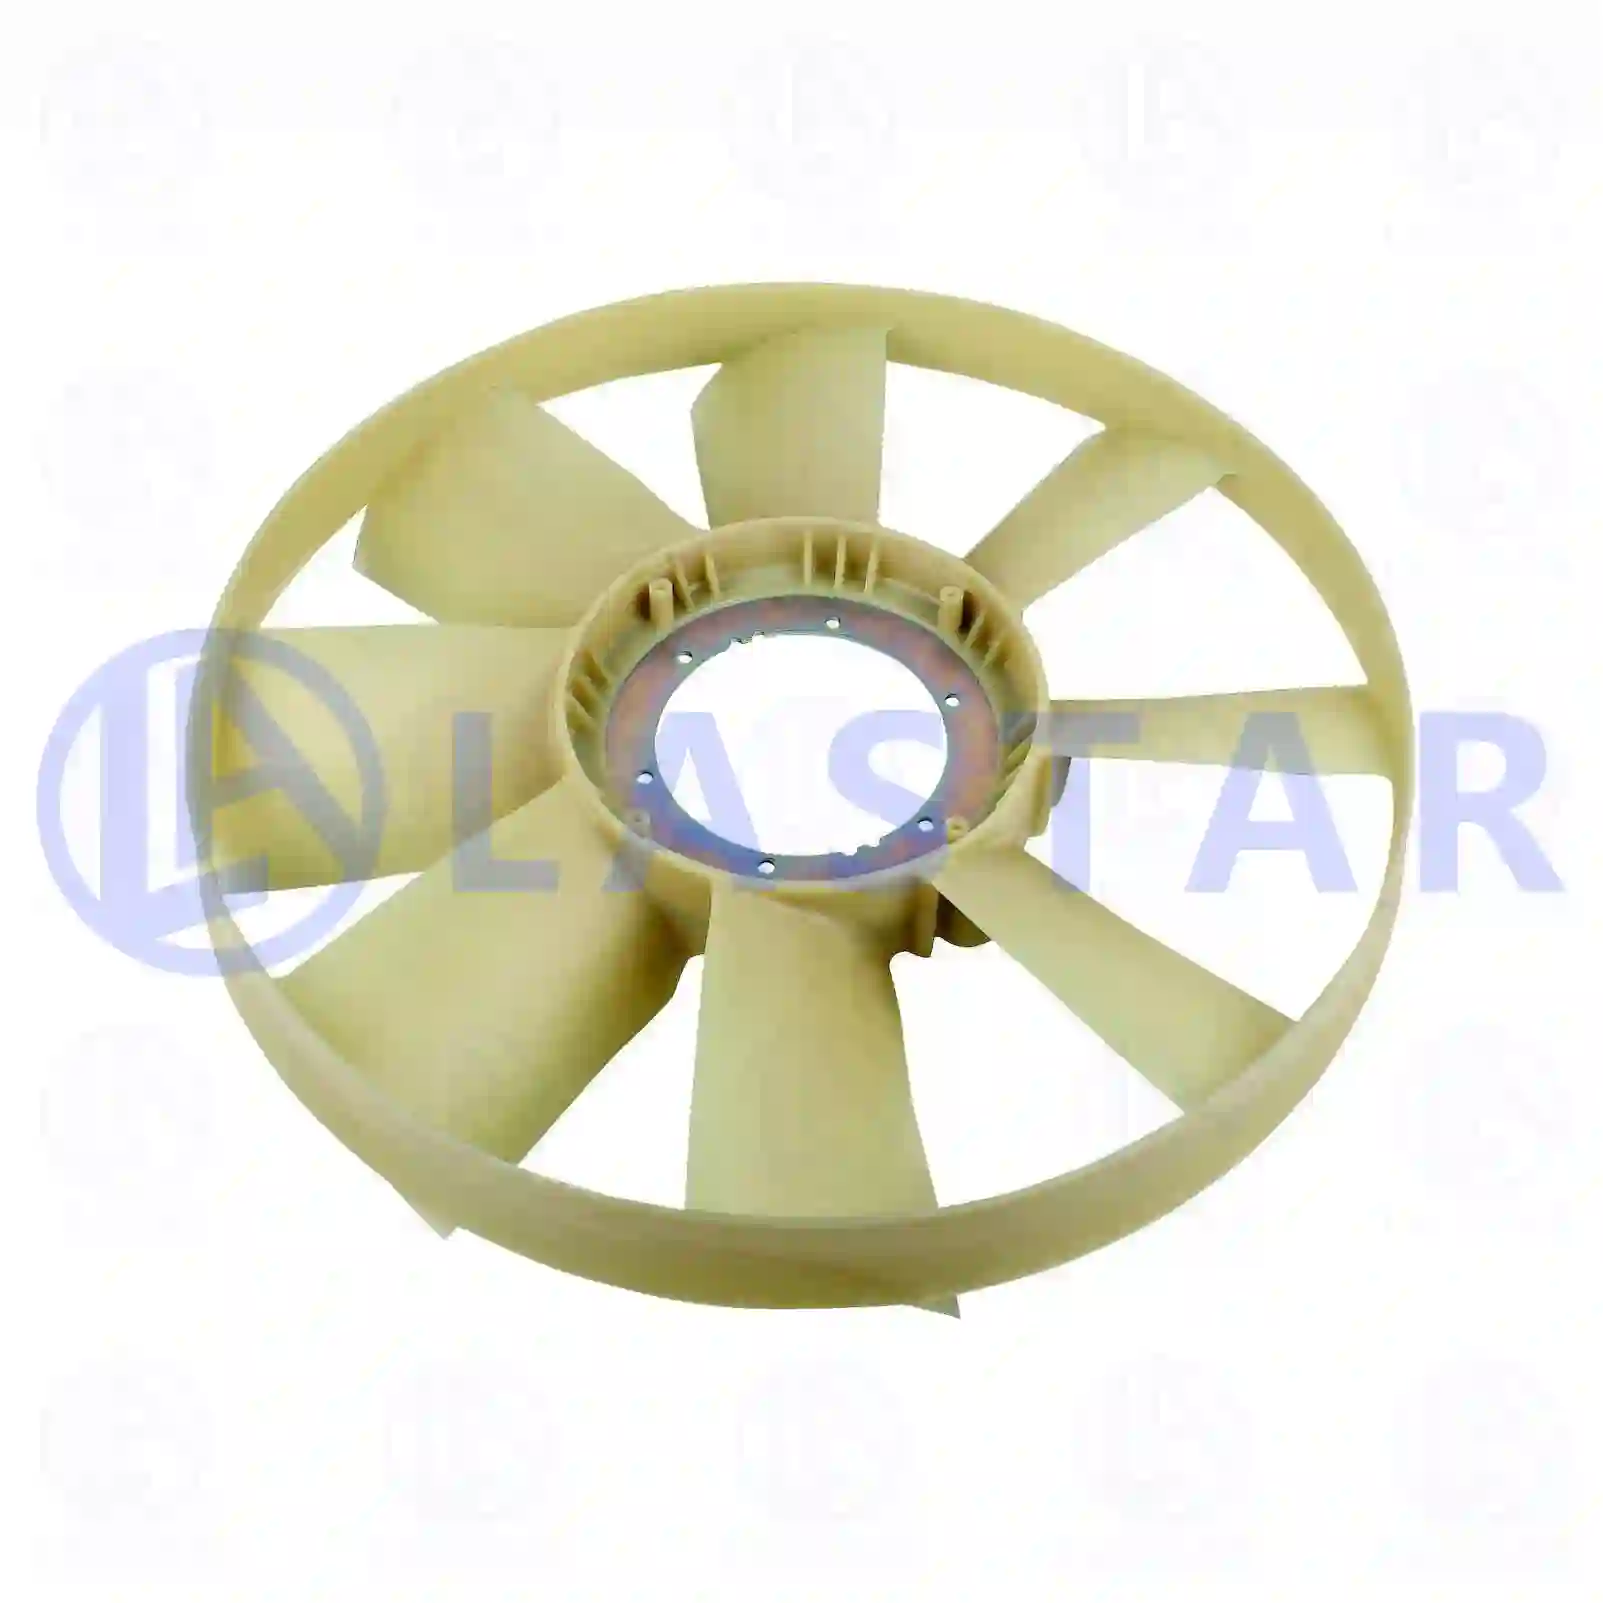 Fan, 77707968, 0032054506, ZG00373-0008 ||  77707968 Lastar Spare Part | Truck Spare Parts, Auotomotive Spare Parts Fan, 77707968, 0032054506, ZG00373-0008 ||  77707968 Lastar Spare Part | Truck Spare Parts, Auotomotive Spare Parts